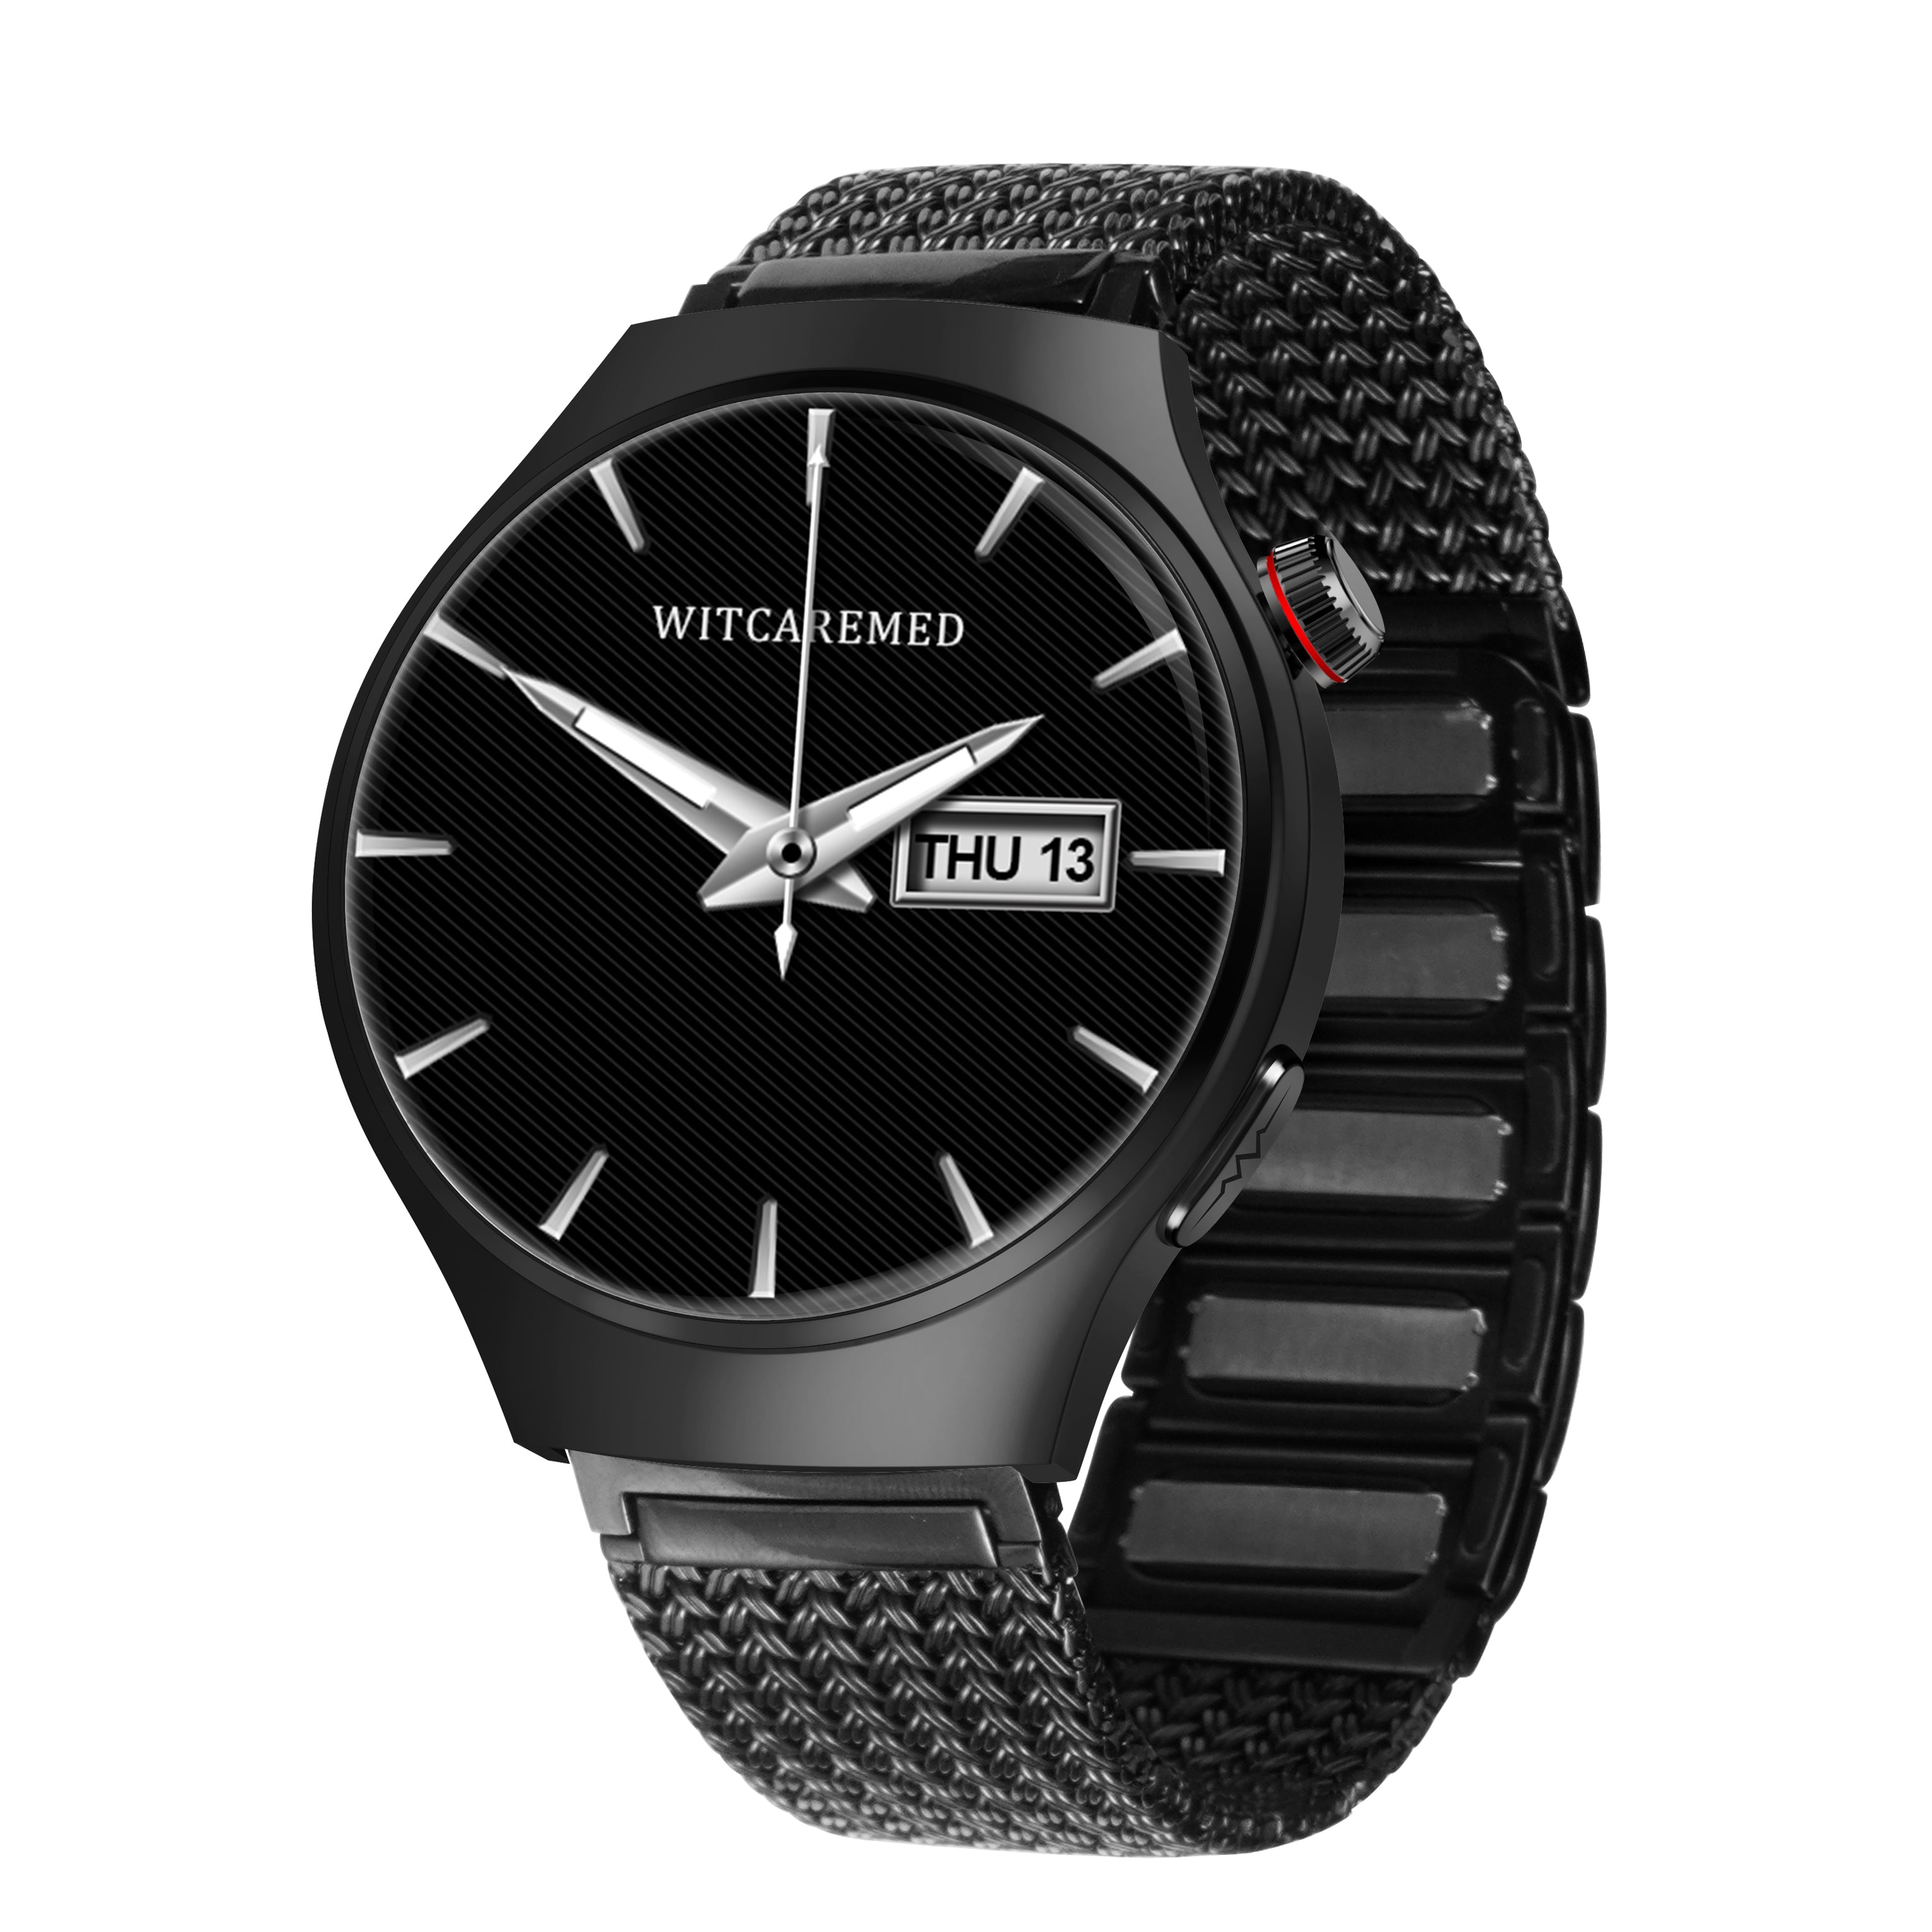 ECG+PPG Smart Health Watch with Bluetooth